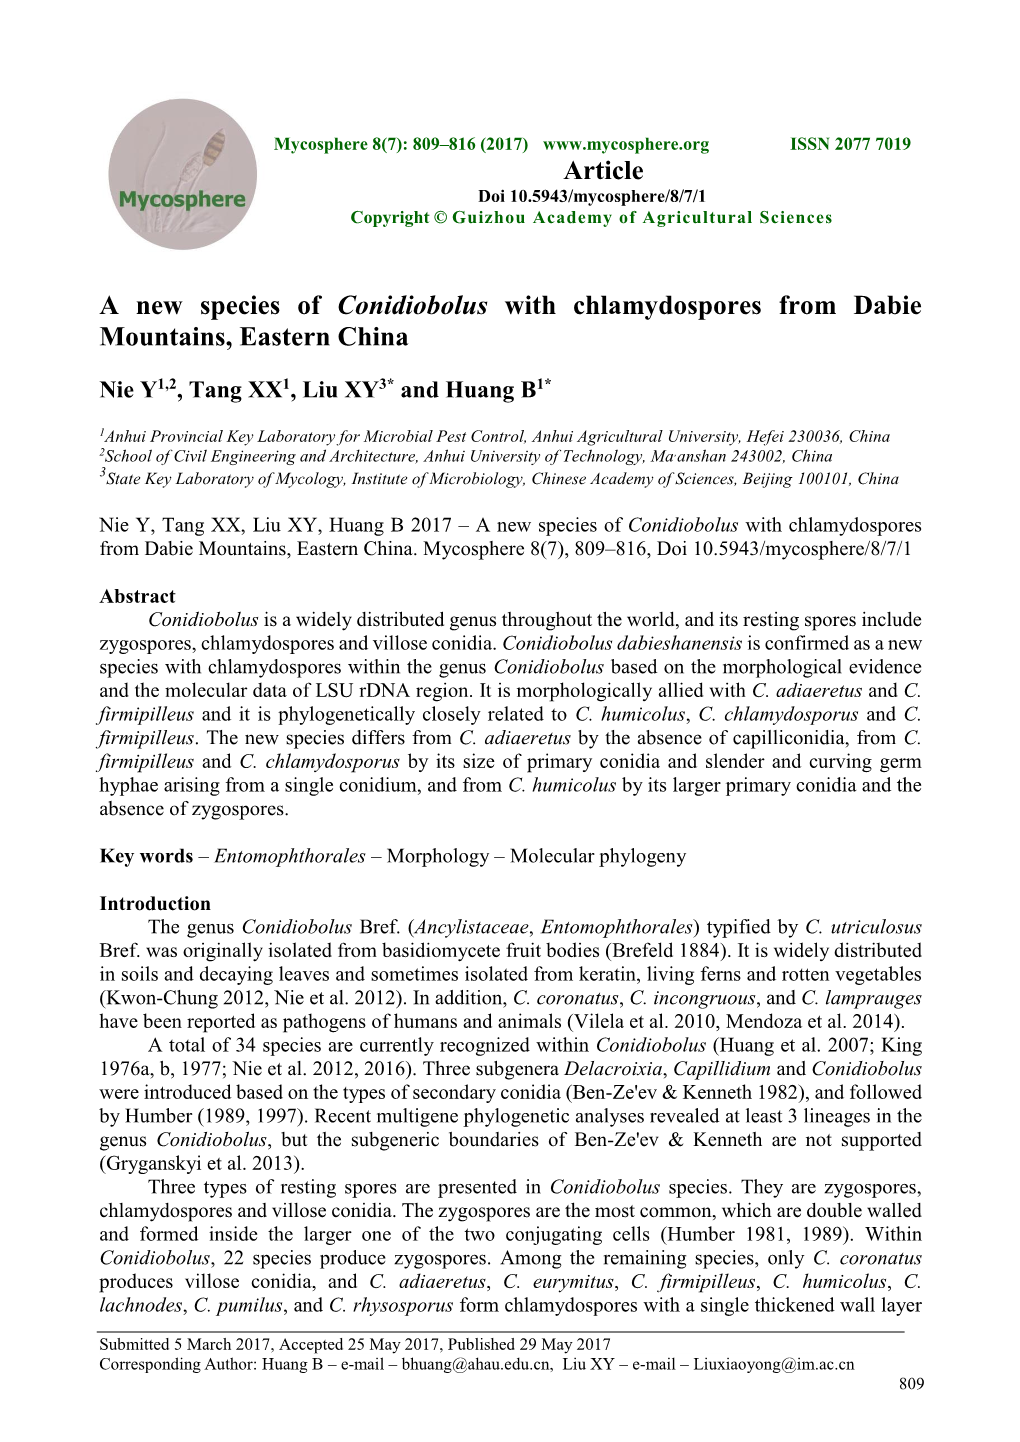 A New Species of Conidiobolus with Chlamydospores from Dabie Mountains, Eastern China Article